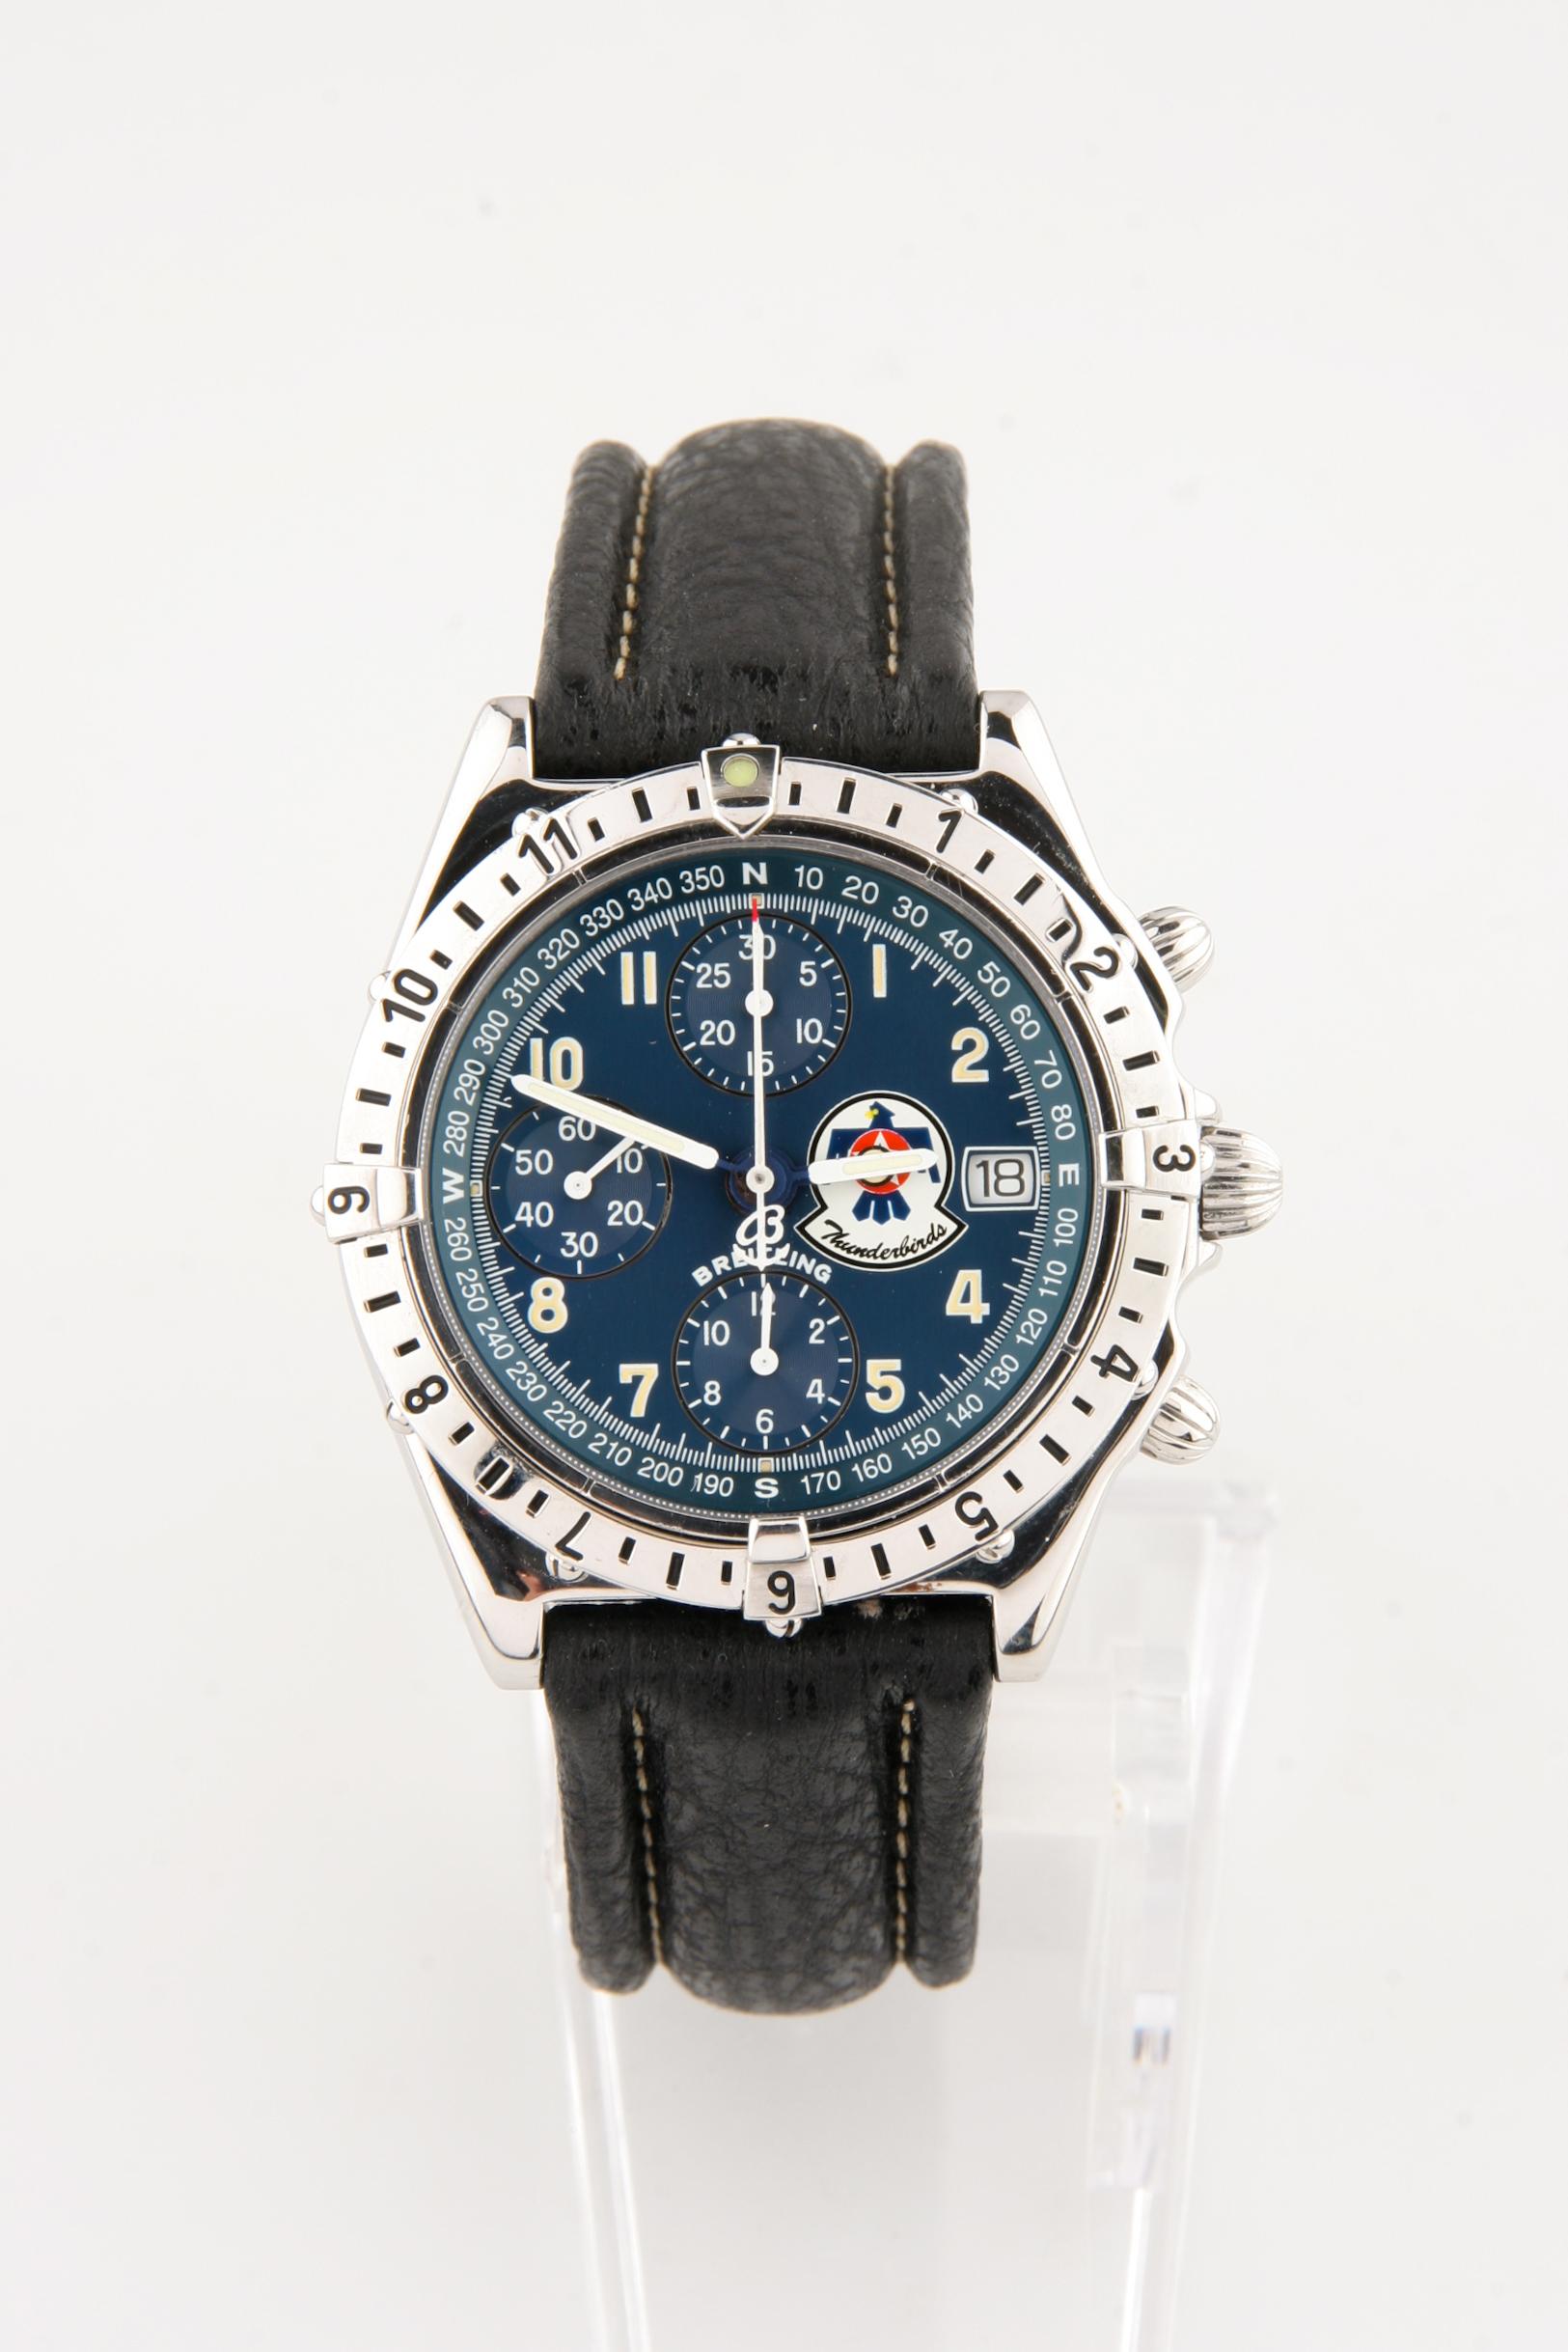 Movement #7750
Case #A20048
Limited Edition #350/1000
Stainless Steel Case
Bezel has Numbers/Tic Marks Engraved
39 mm in Diameter (44 mm w/ Crown)
Lug-to-Lug Distance = 45 mm
Thickness = 13 mm
Navy Blue Chronograph Dial w/ Thunderbird Decal
Includes